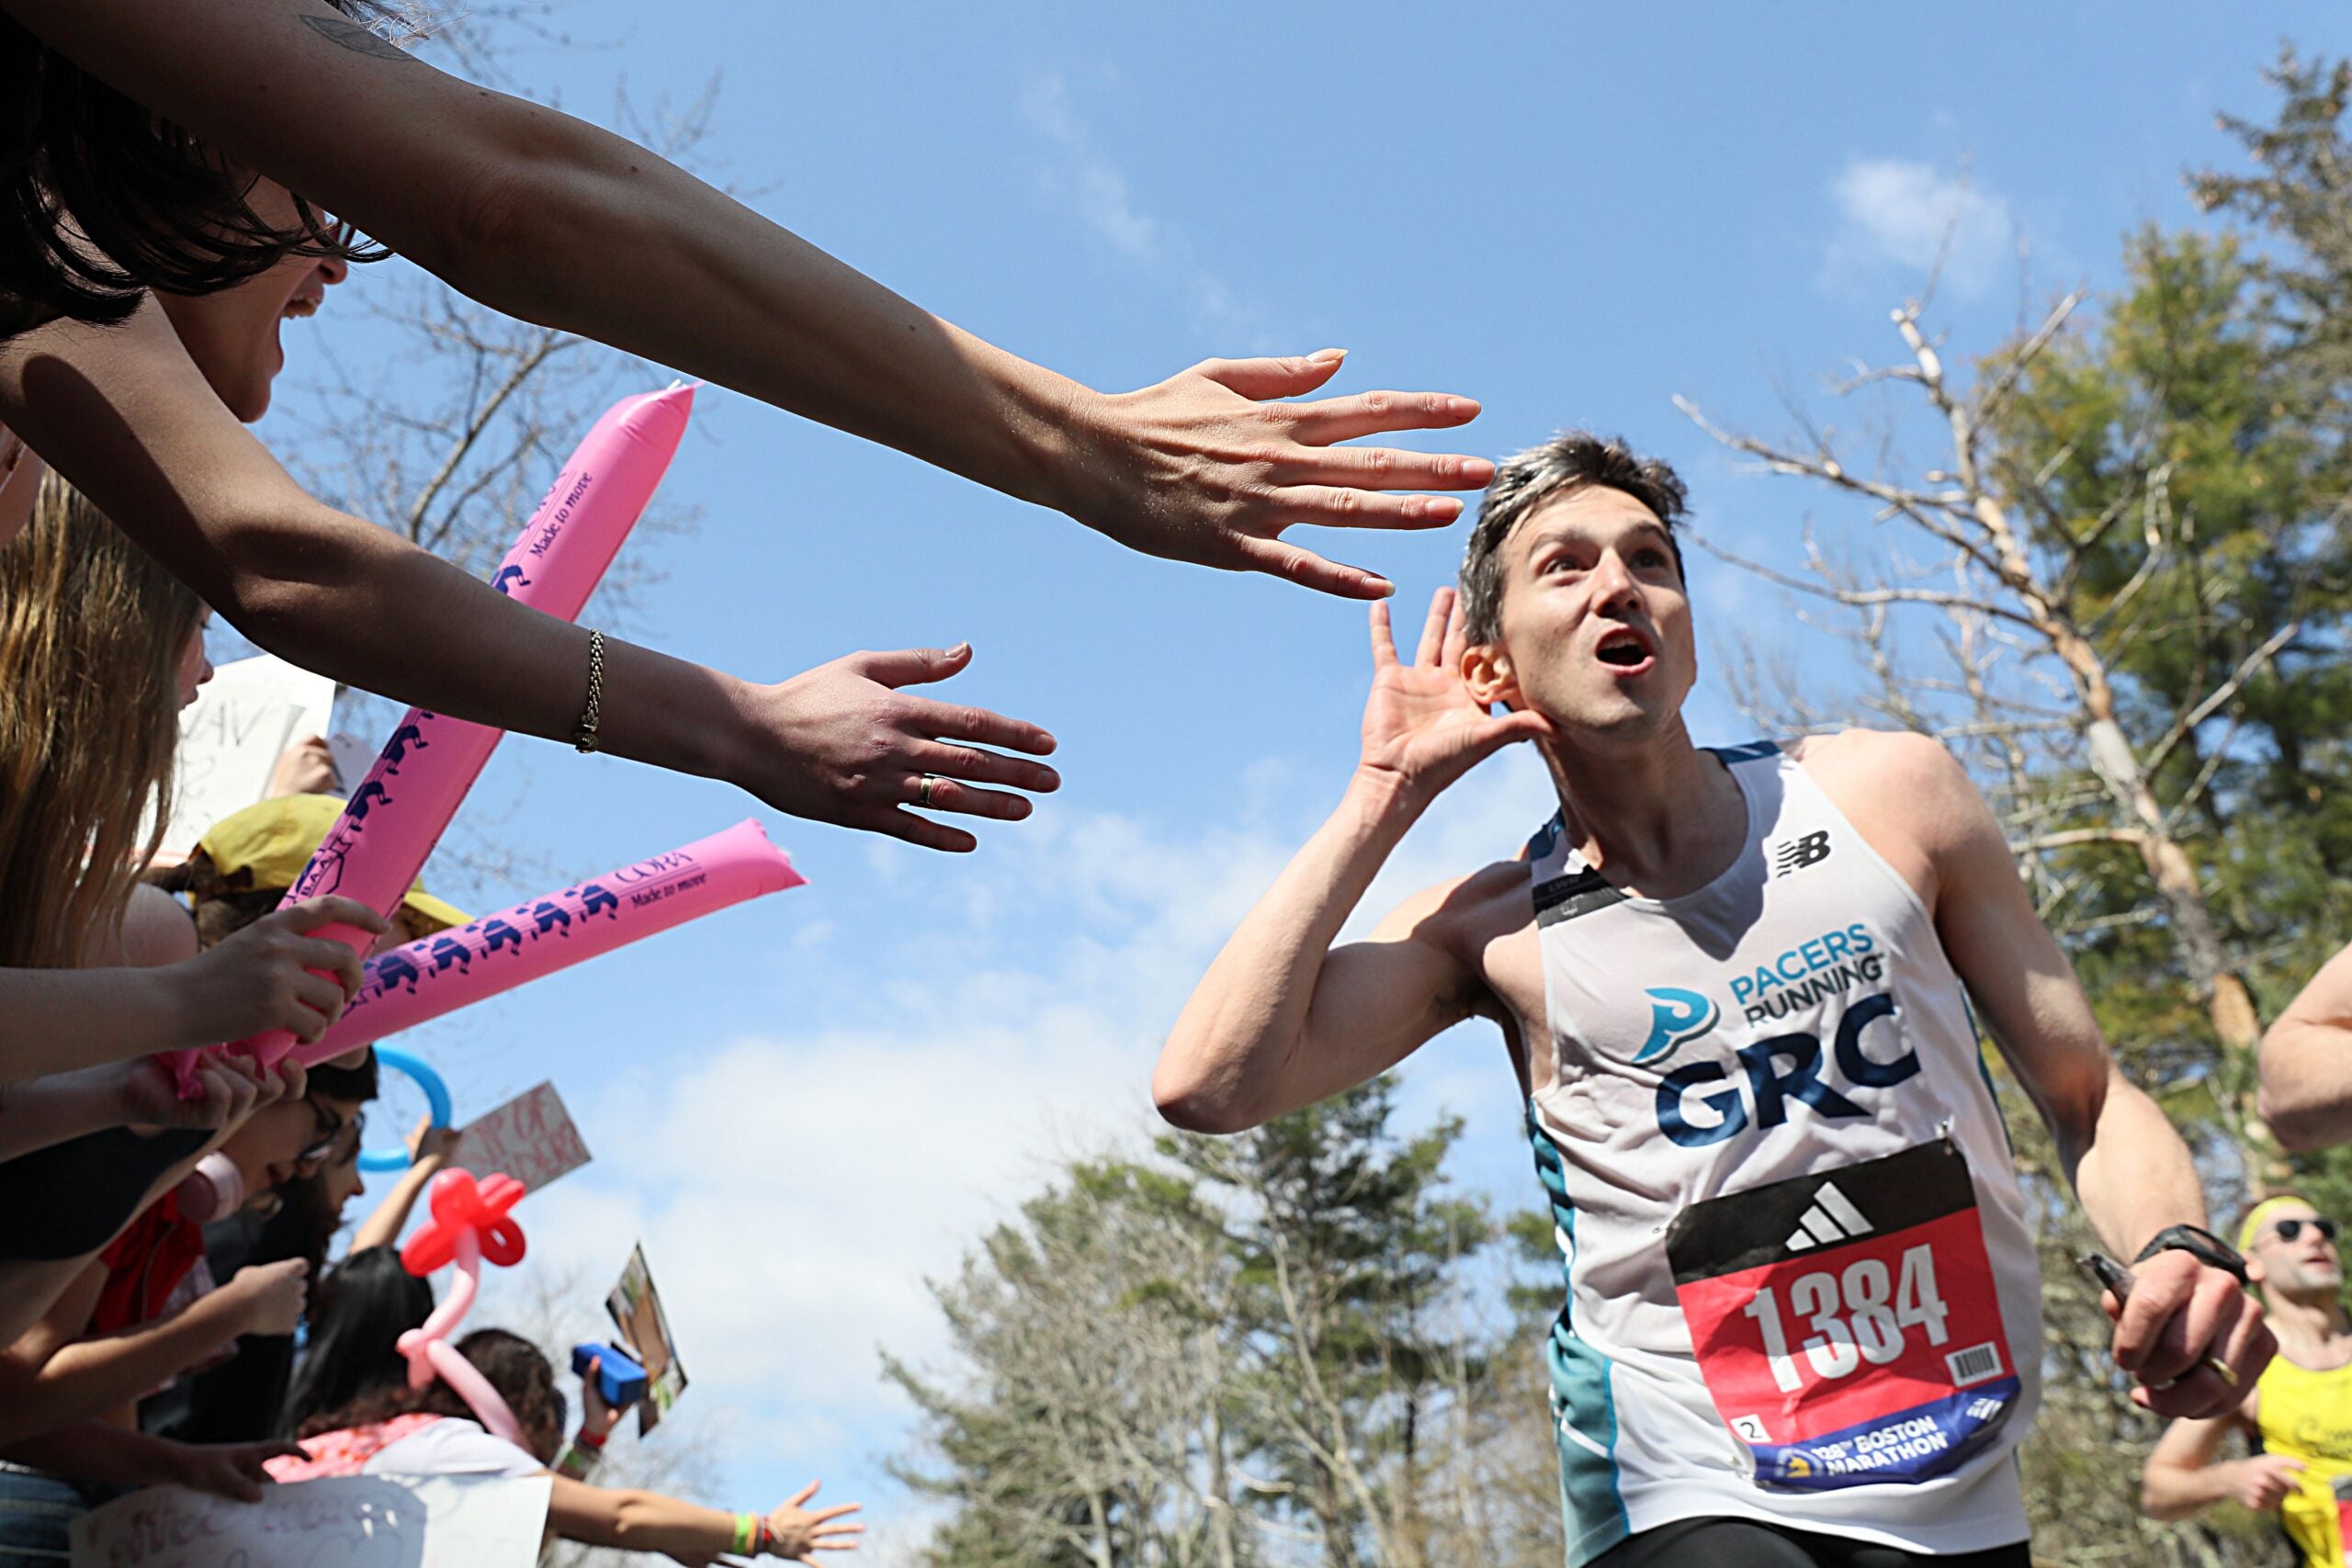 A runner motioned for the Wellesley College students to cheer louder as he passed Wellesley College.